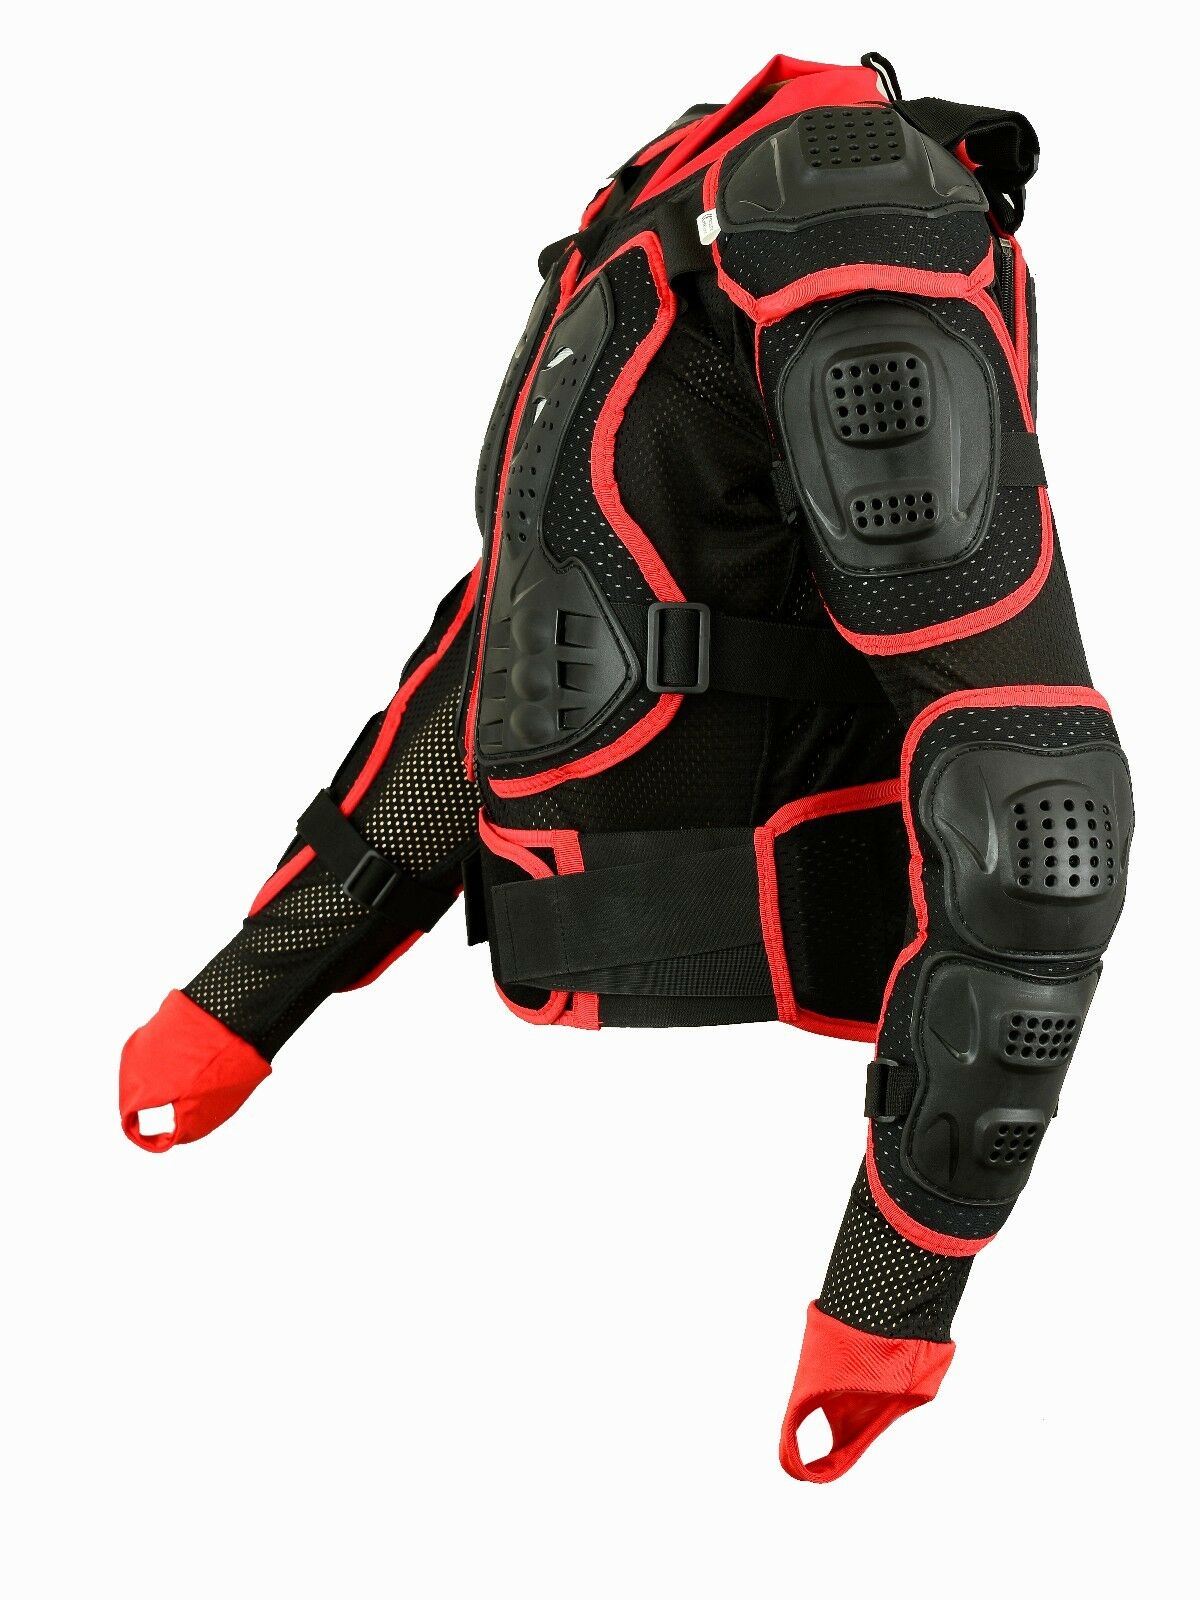 Body Armour Motorcycle Motorbike Motocross spine Protector Guard Bionic Jacket - Hamtons Direct